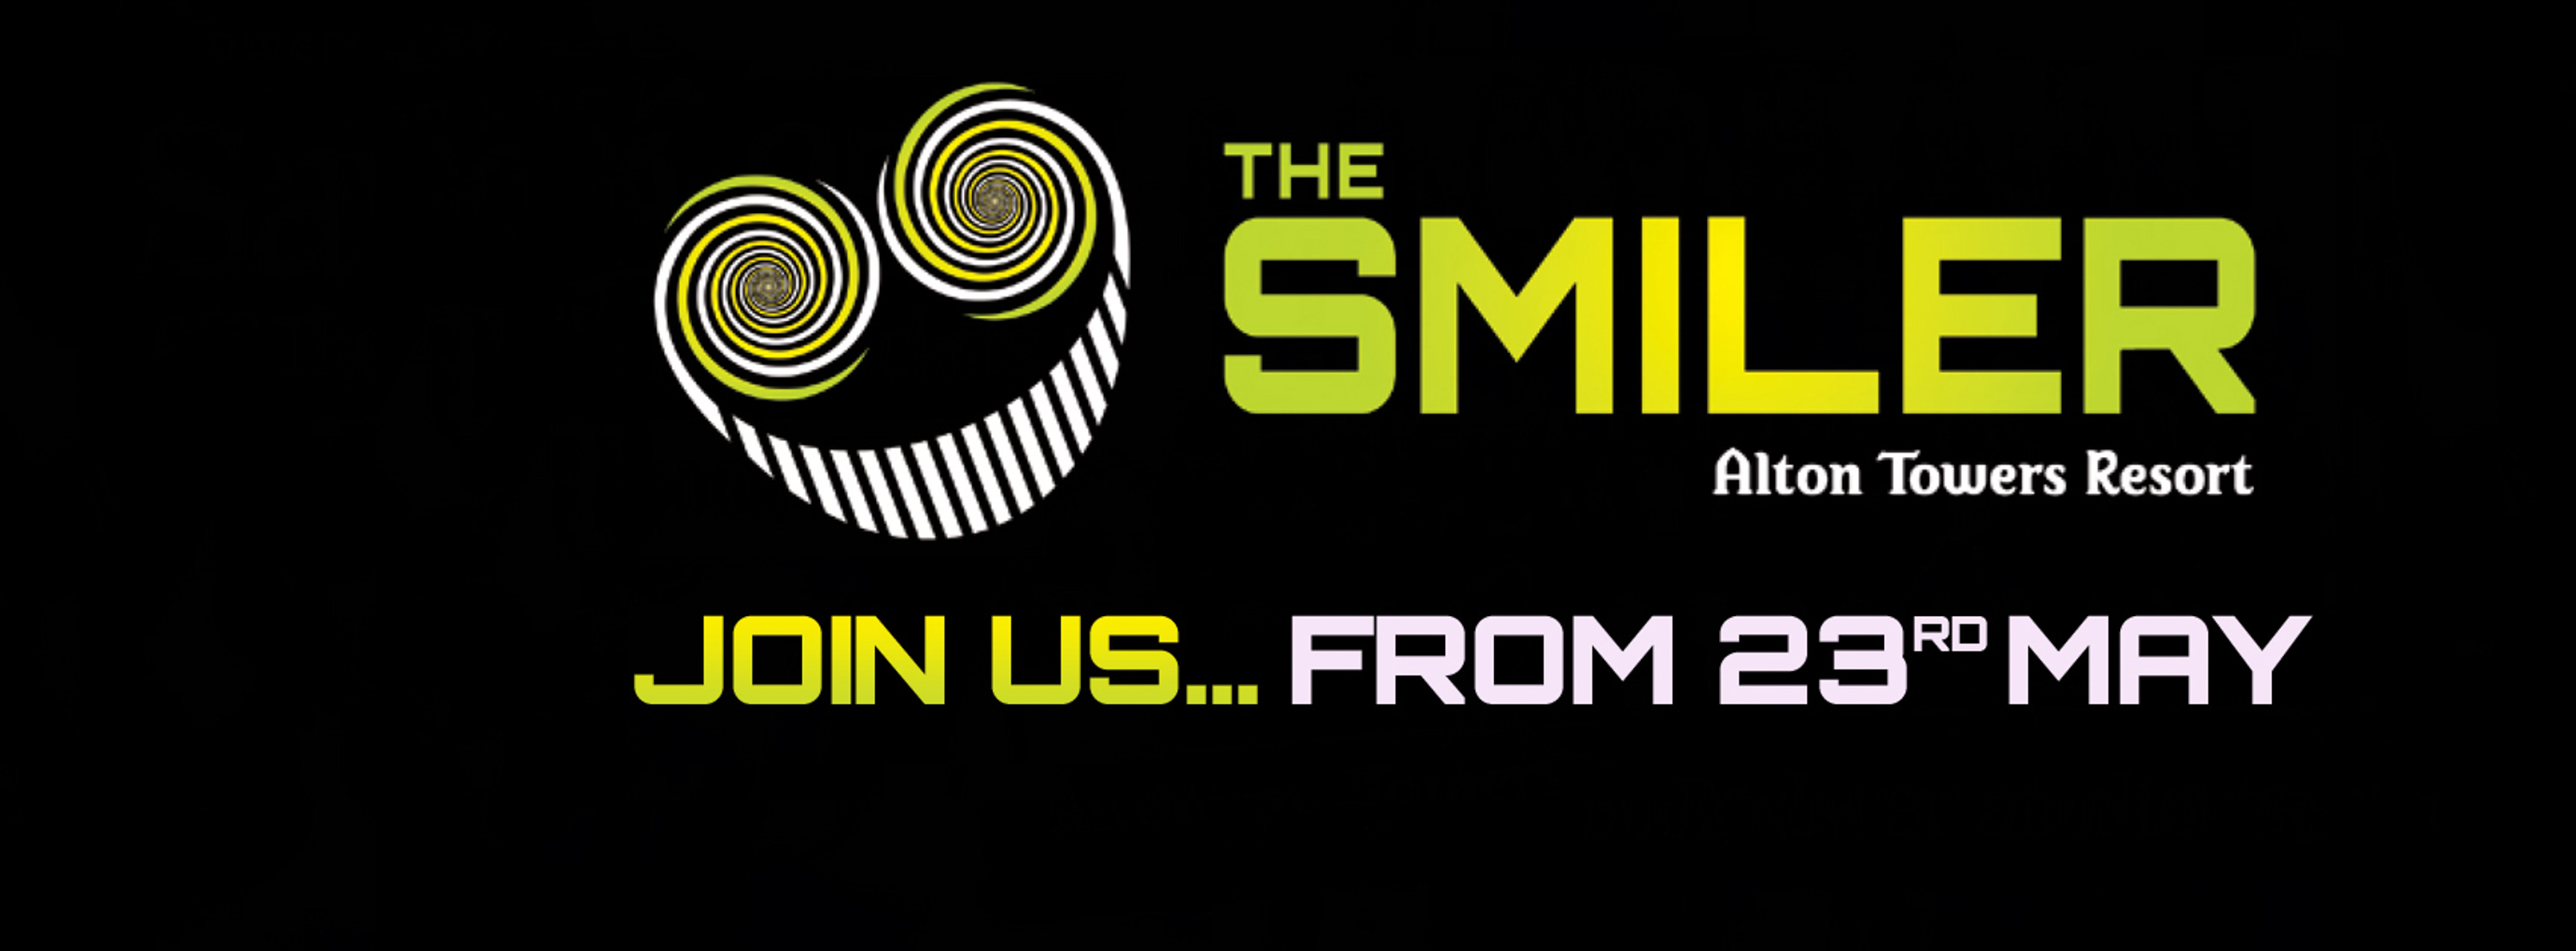 The Smiler opening date